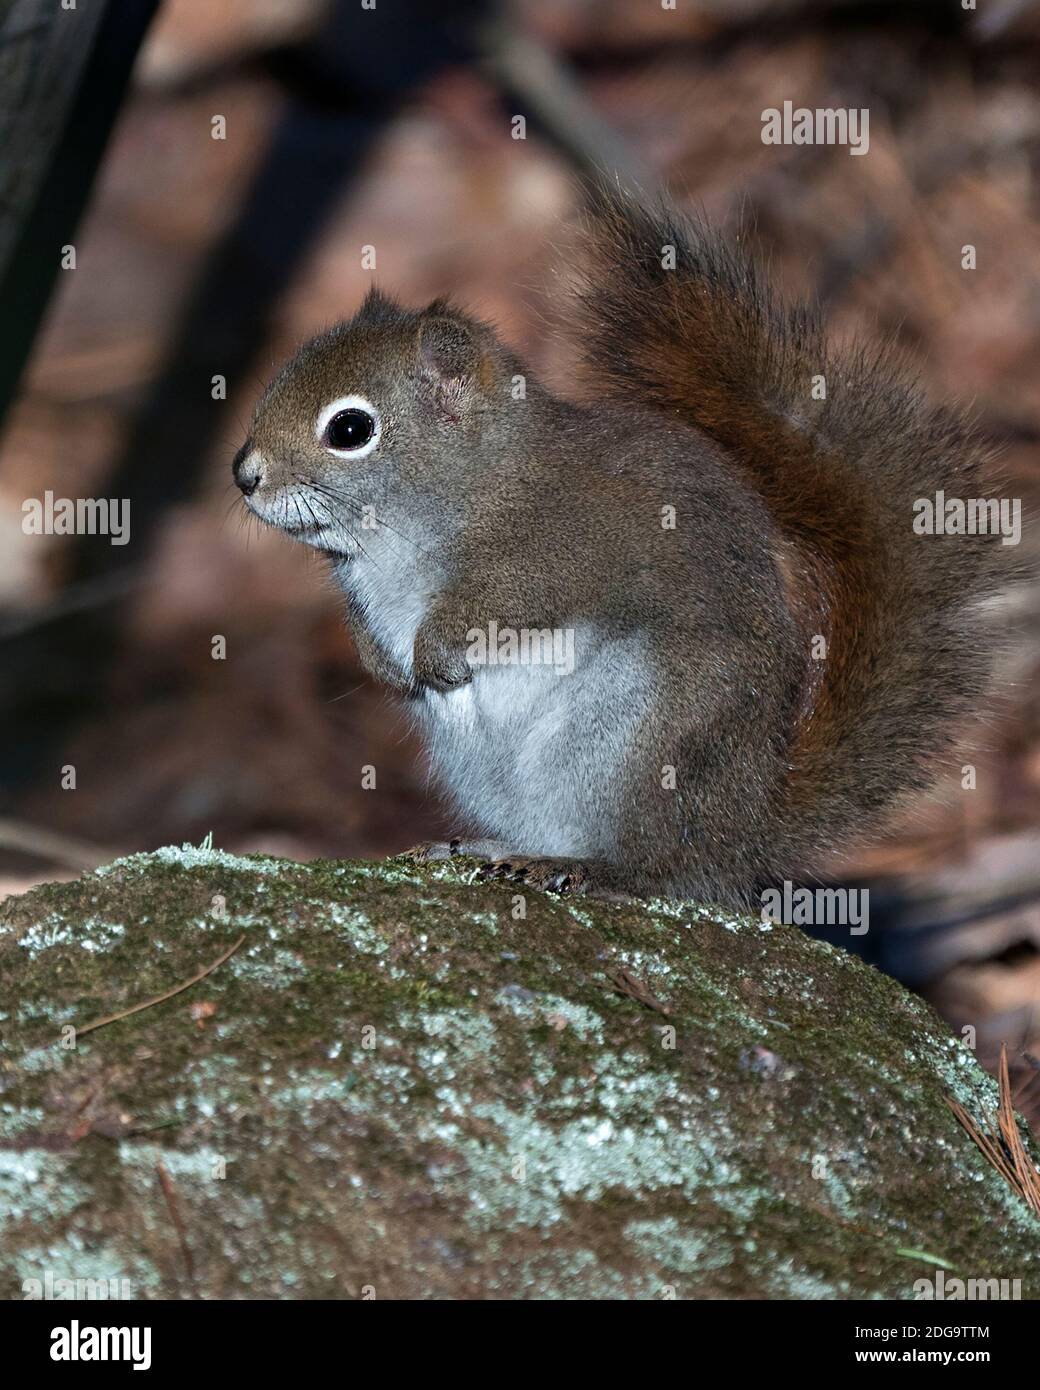 Squirrel close-up profile side view sitting on a moss rock with a blur background, displaying bushy tail, brown fur in its environment and habitat. Stock Photo